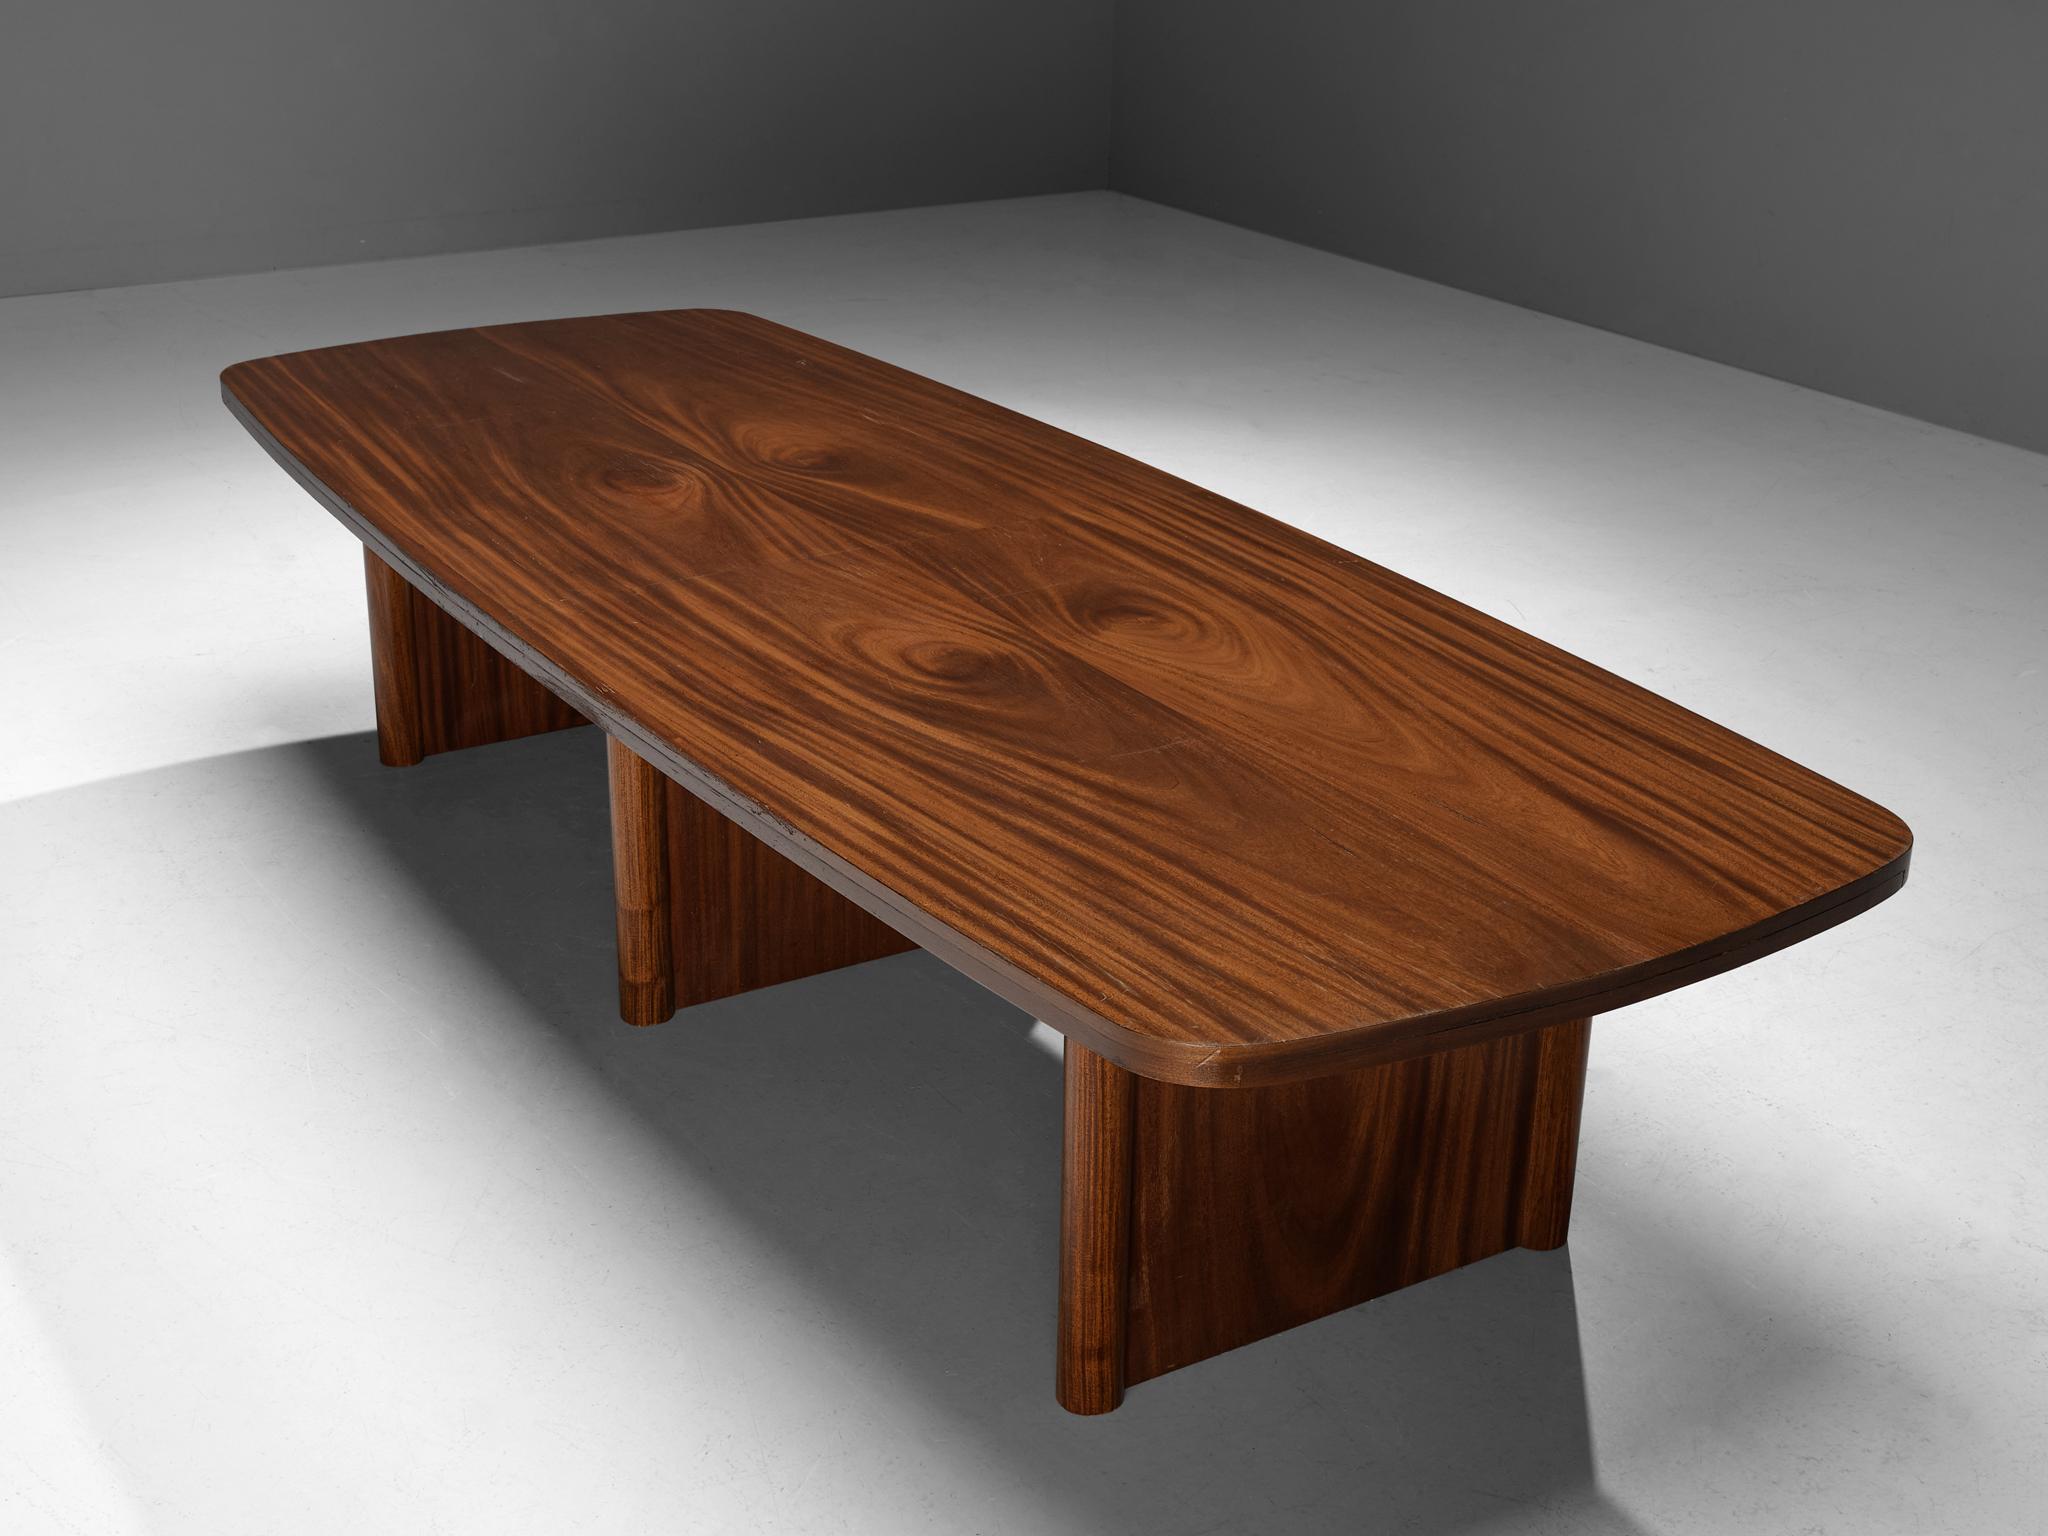 Dining or conference table, walnut, Denmark, 1960s

Beautiful and moody table, made in Denmark in the 1960s. This table has an impressive size and is therefore suitable for the larger dining or conference area. The boat-shaped top is executed in